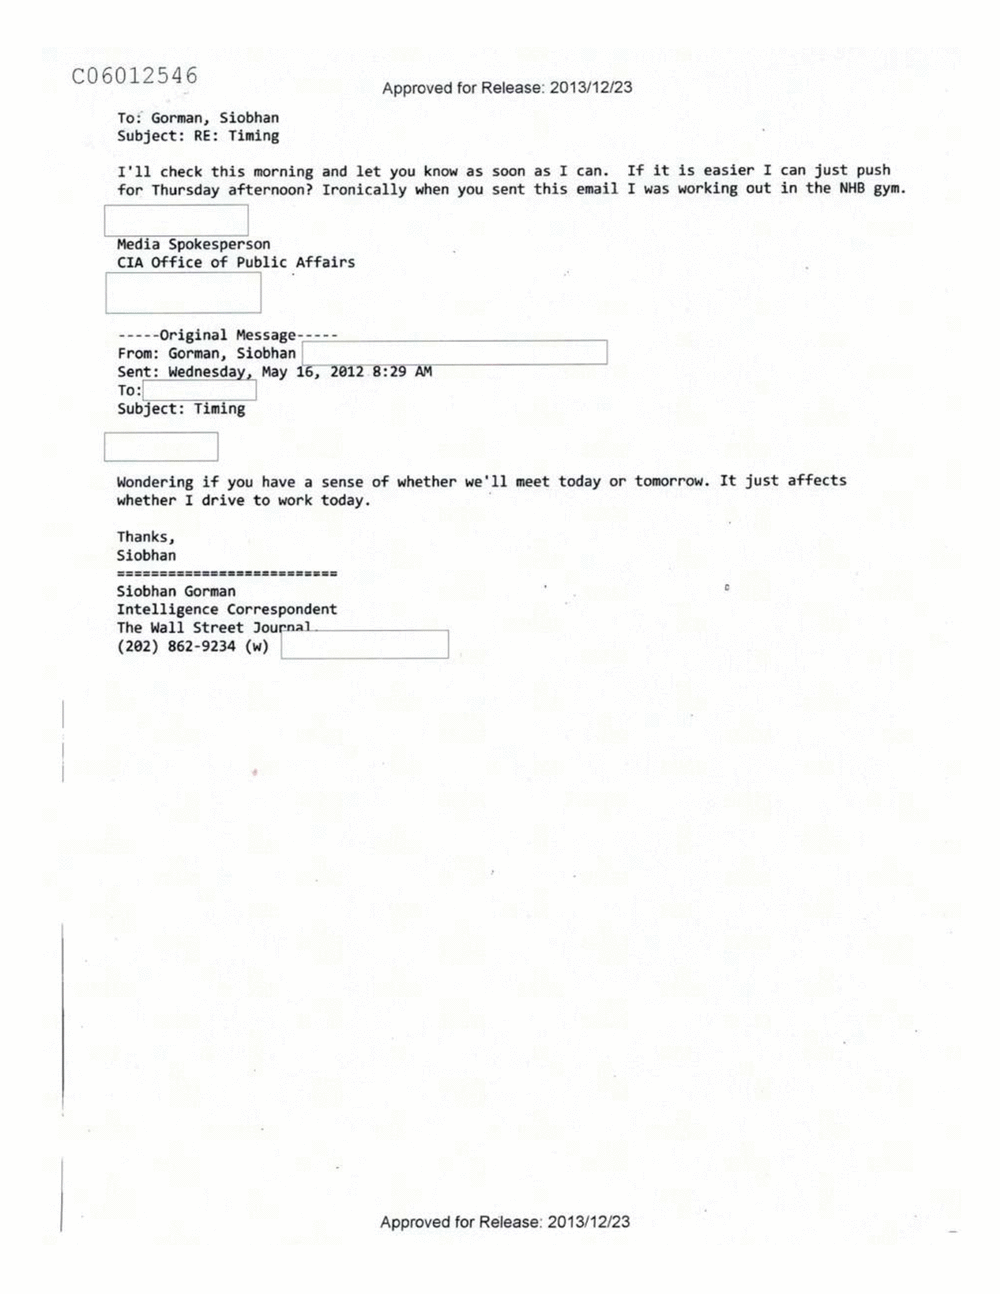 Page 81 from Email Correspondence Between Reporters and CIA Flacks